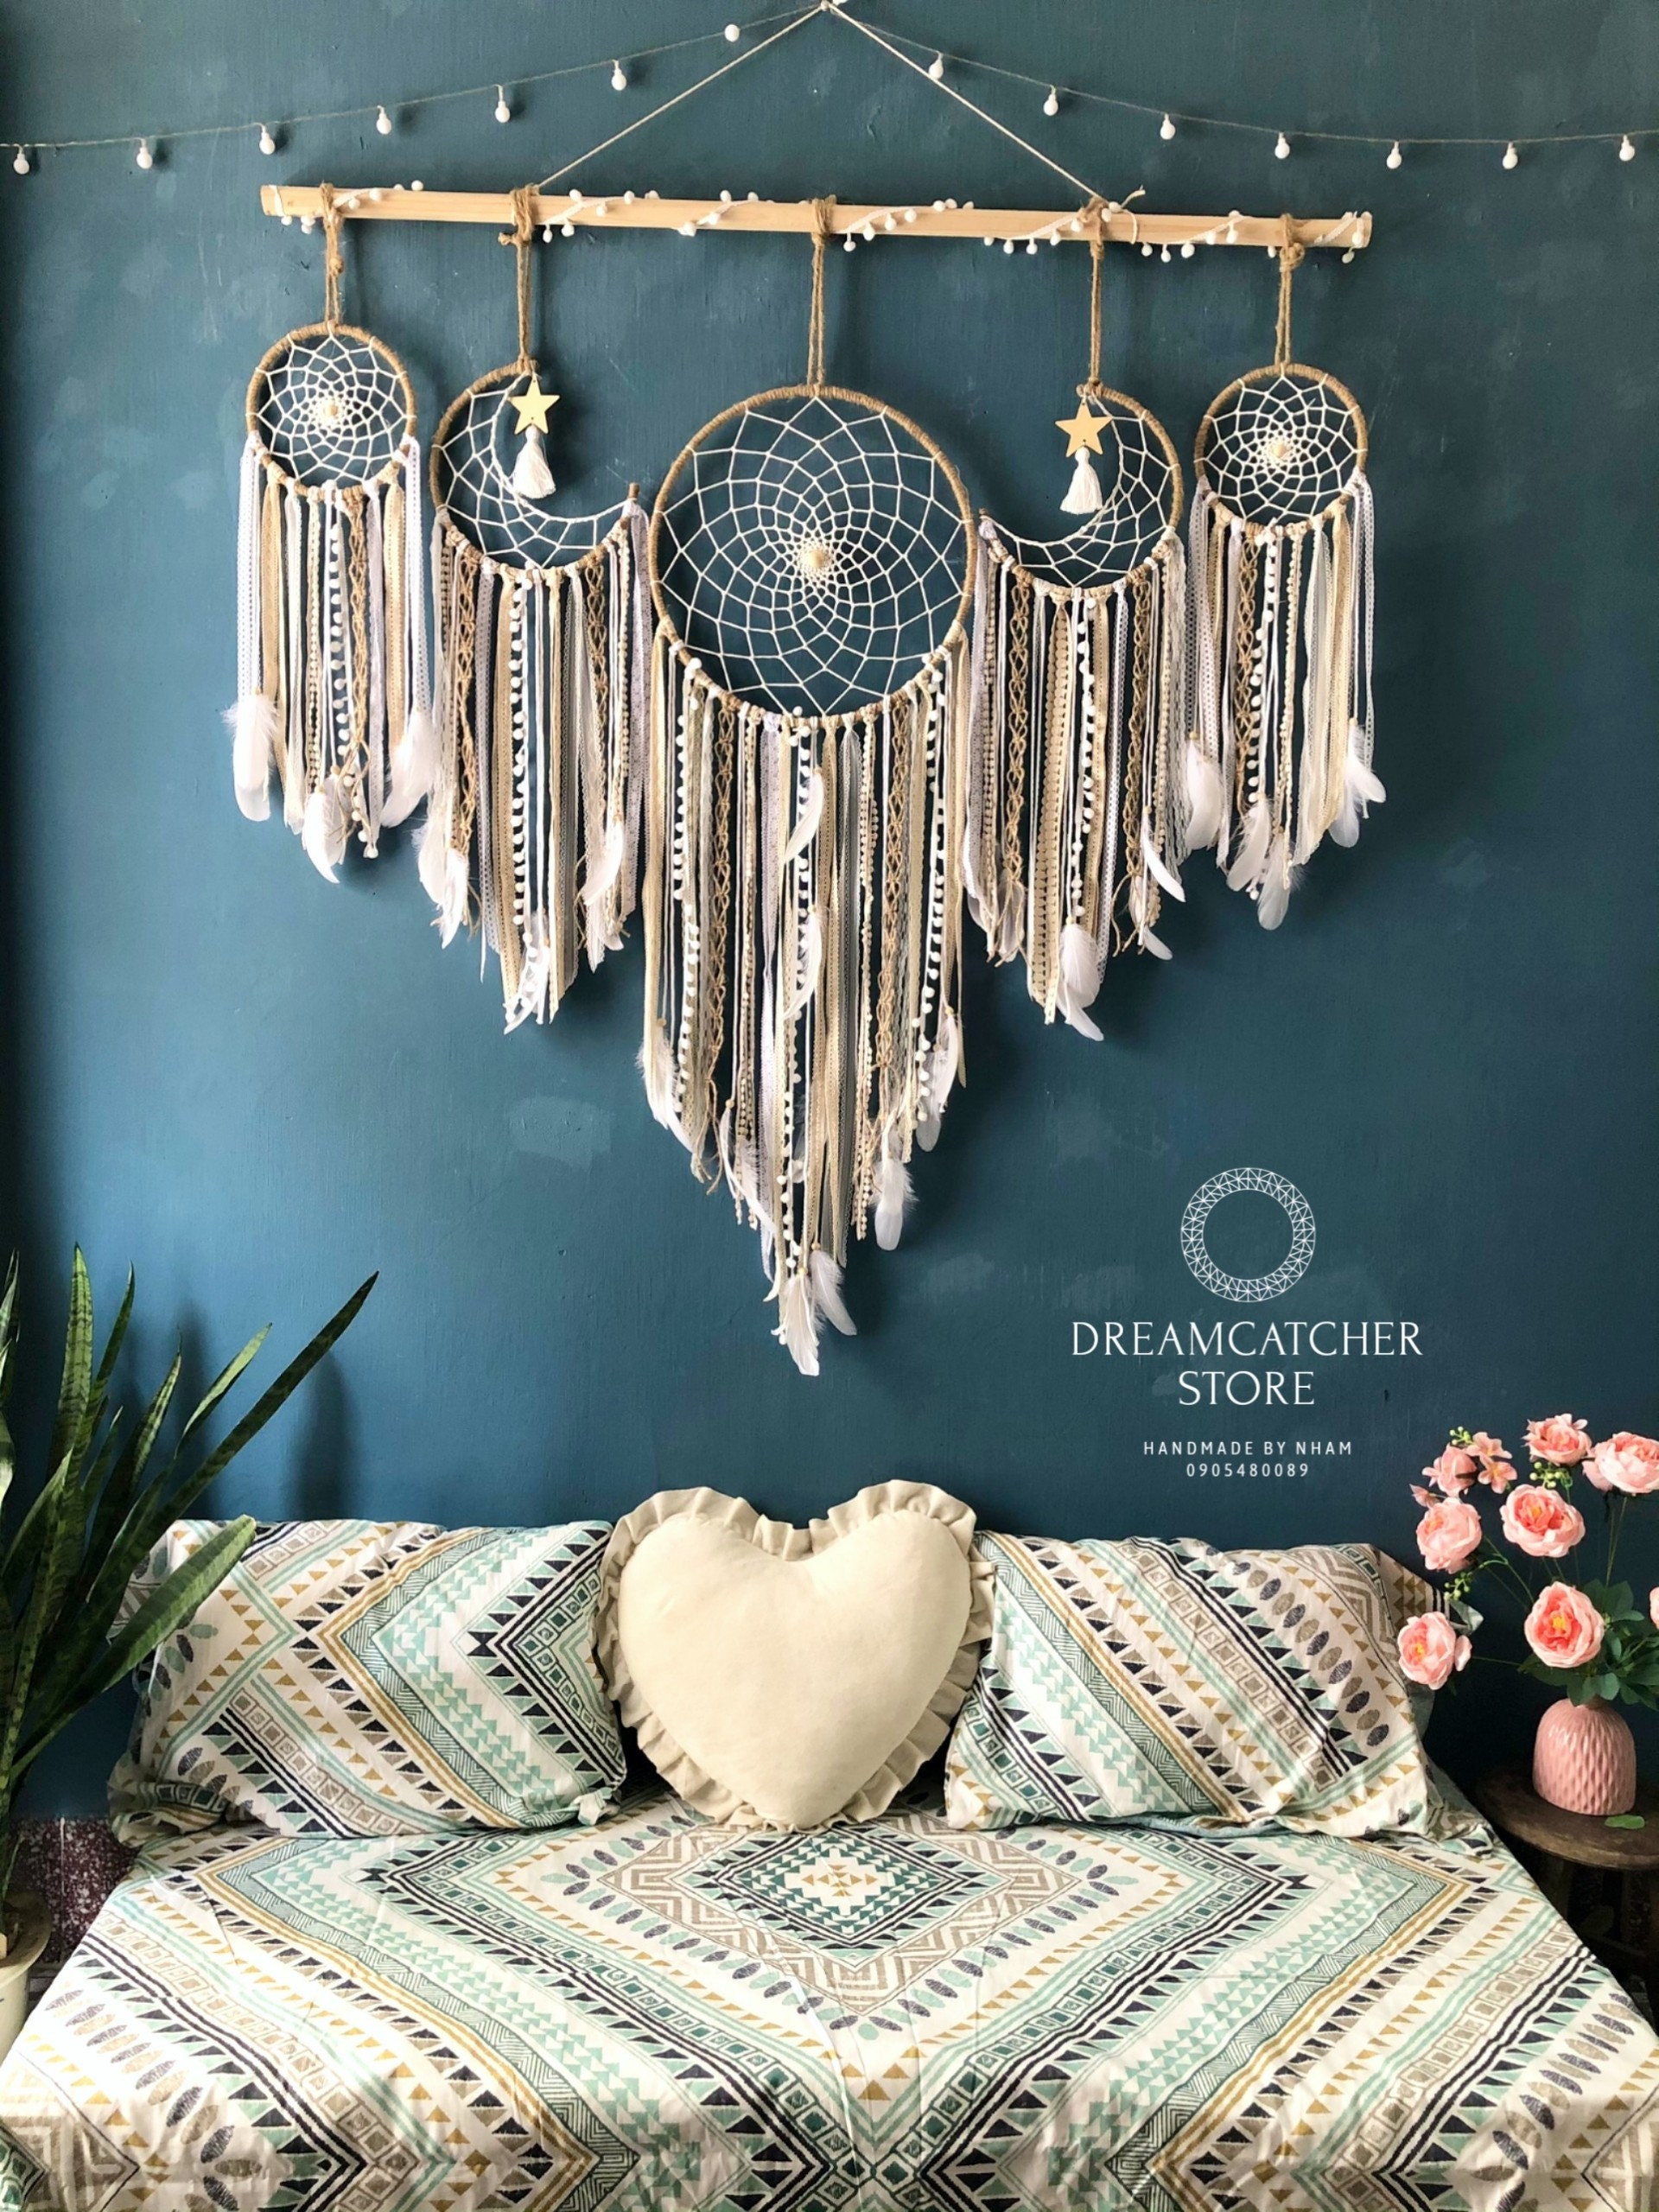  CAPRIZ Large Dream Catcher Moon and Stars Hanging Over The Bed,  Feathers Dream Catcher Home Wall Hanging Decor, Handmade Weave Feathers Dream  Catcher Ornament Home Room Decor : Home & Kitchen